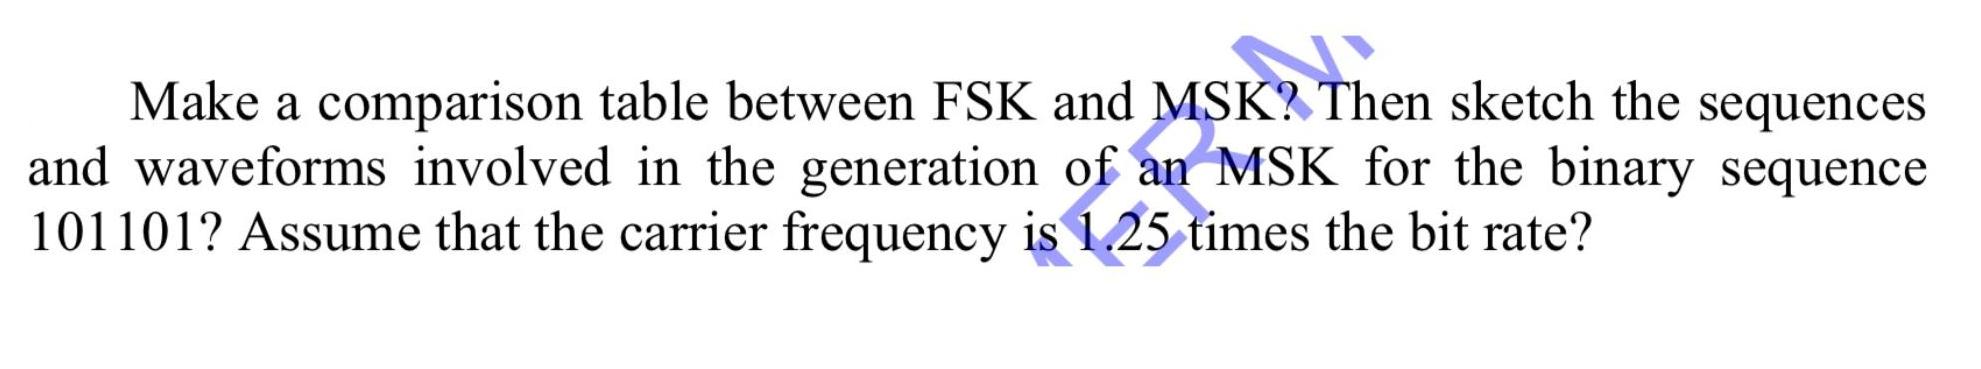 Make a comparison table between FSK and MSK? Then sketch the sequences and waveforms involved in the